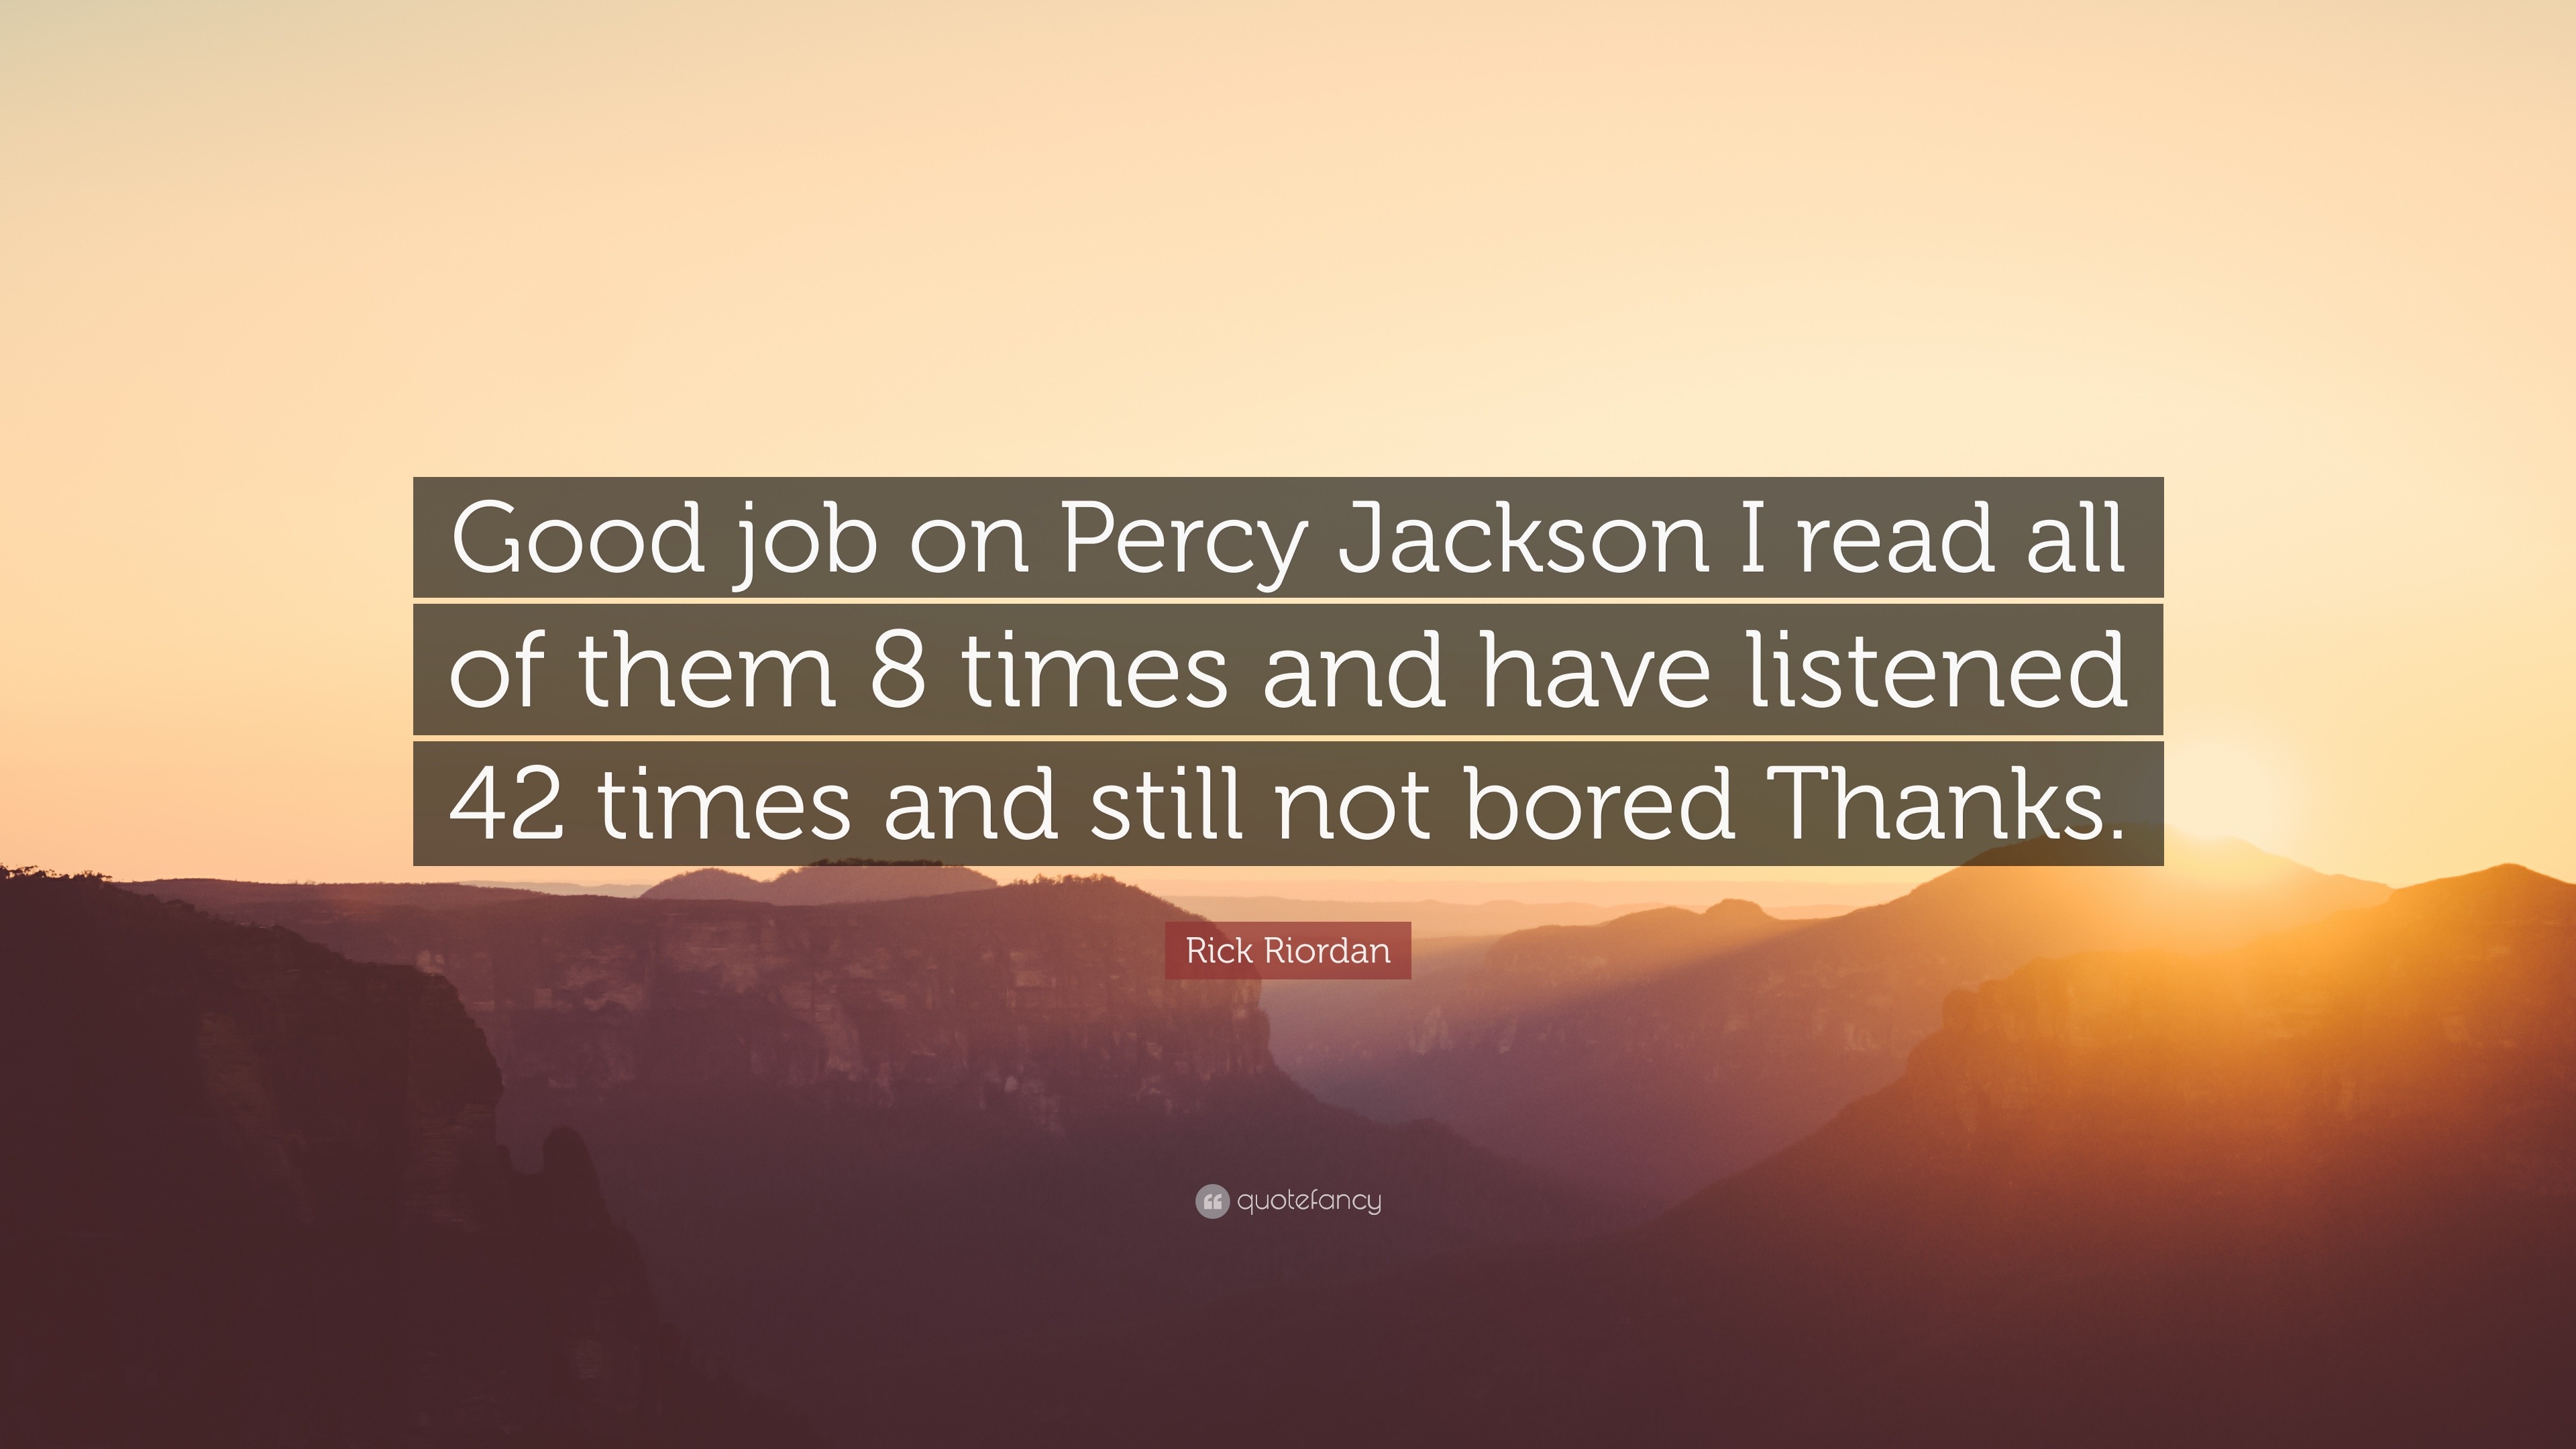 famous quotes from rick riordan on demigods and magicians